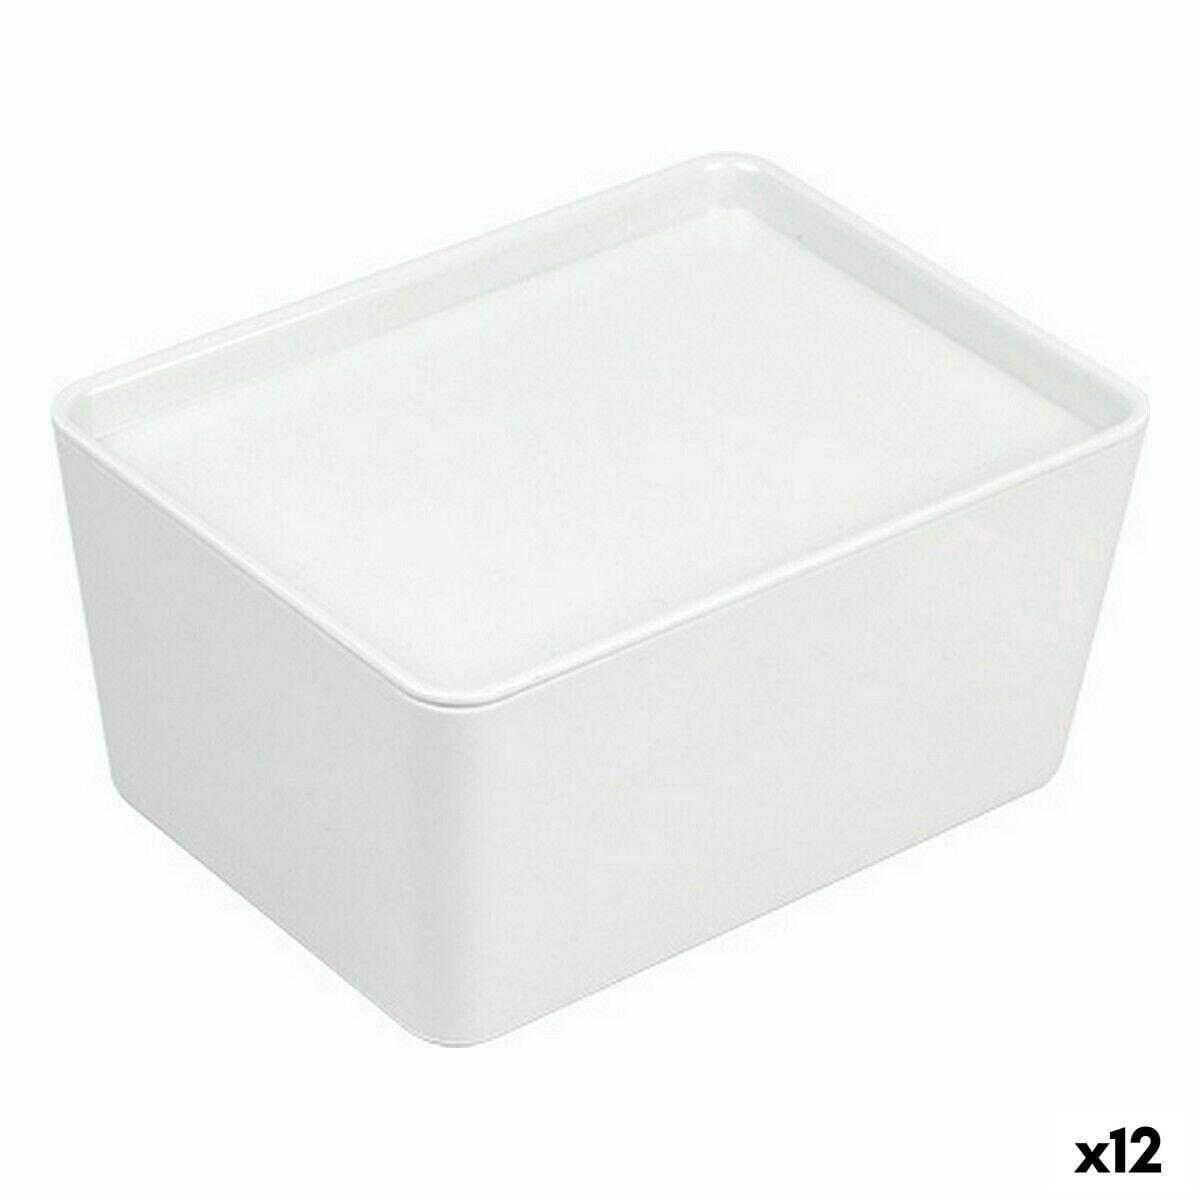 Stackable Organising Box Confortime With lid 17,5 x 13 x 8,5 cm (12 Units)